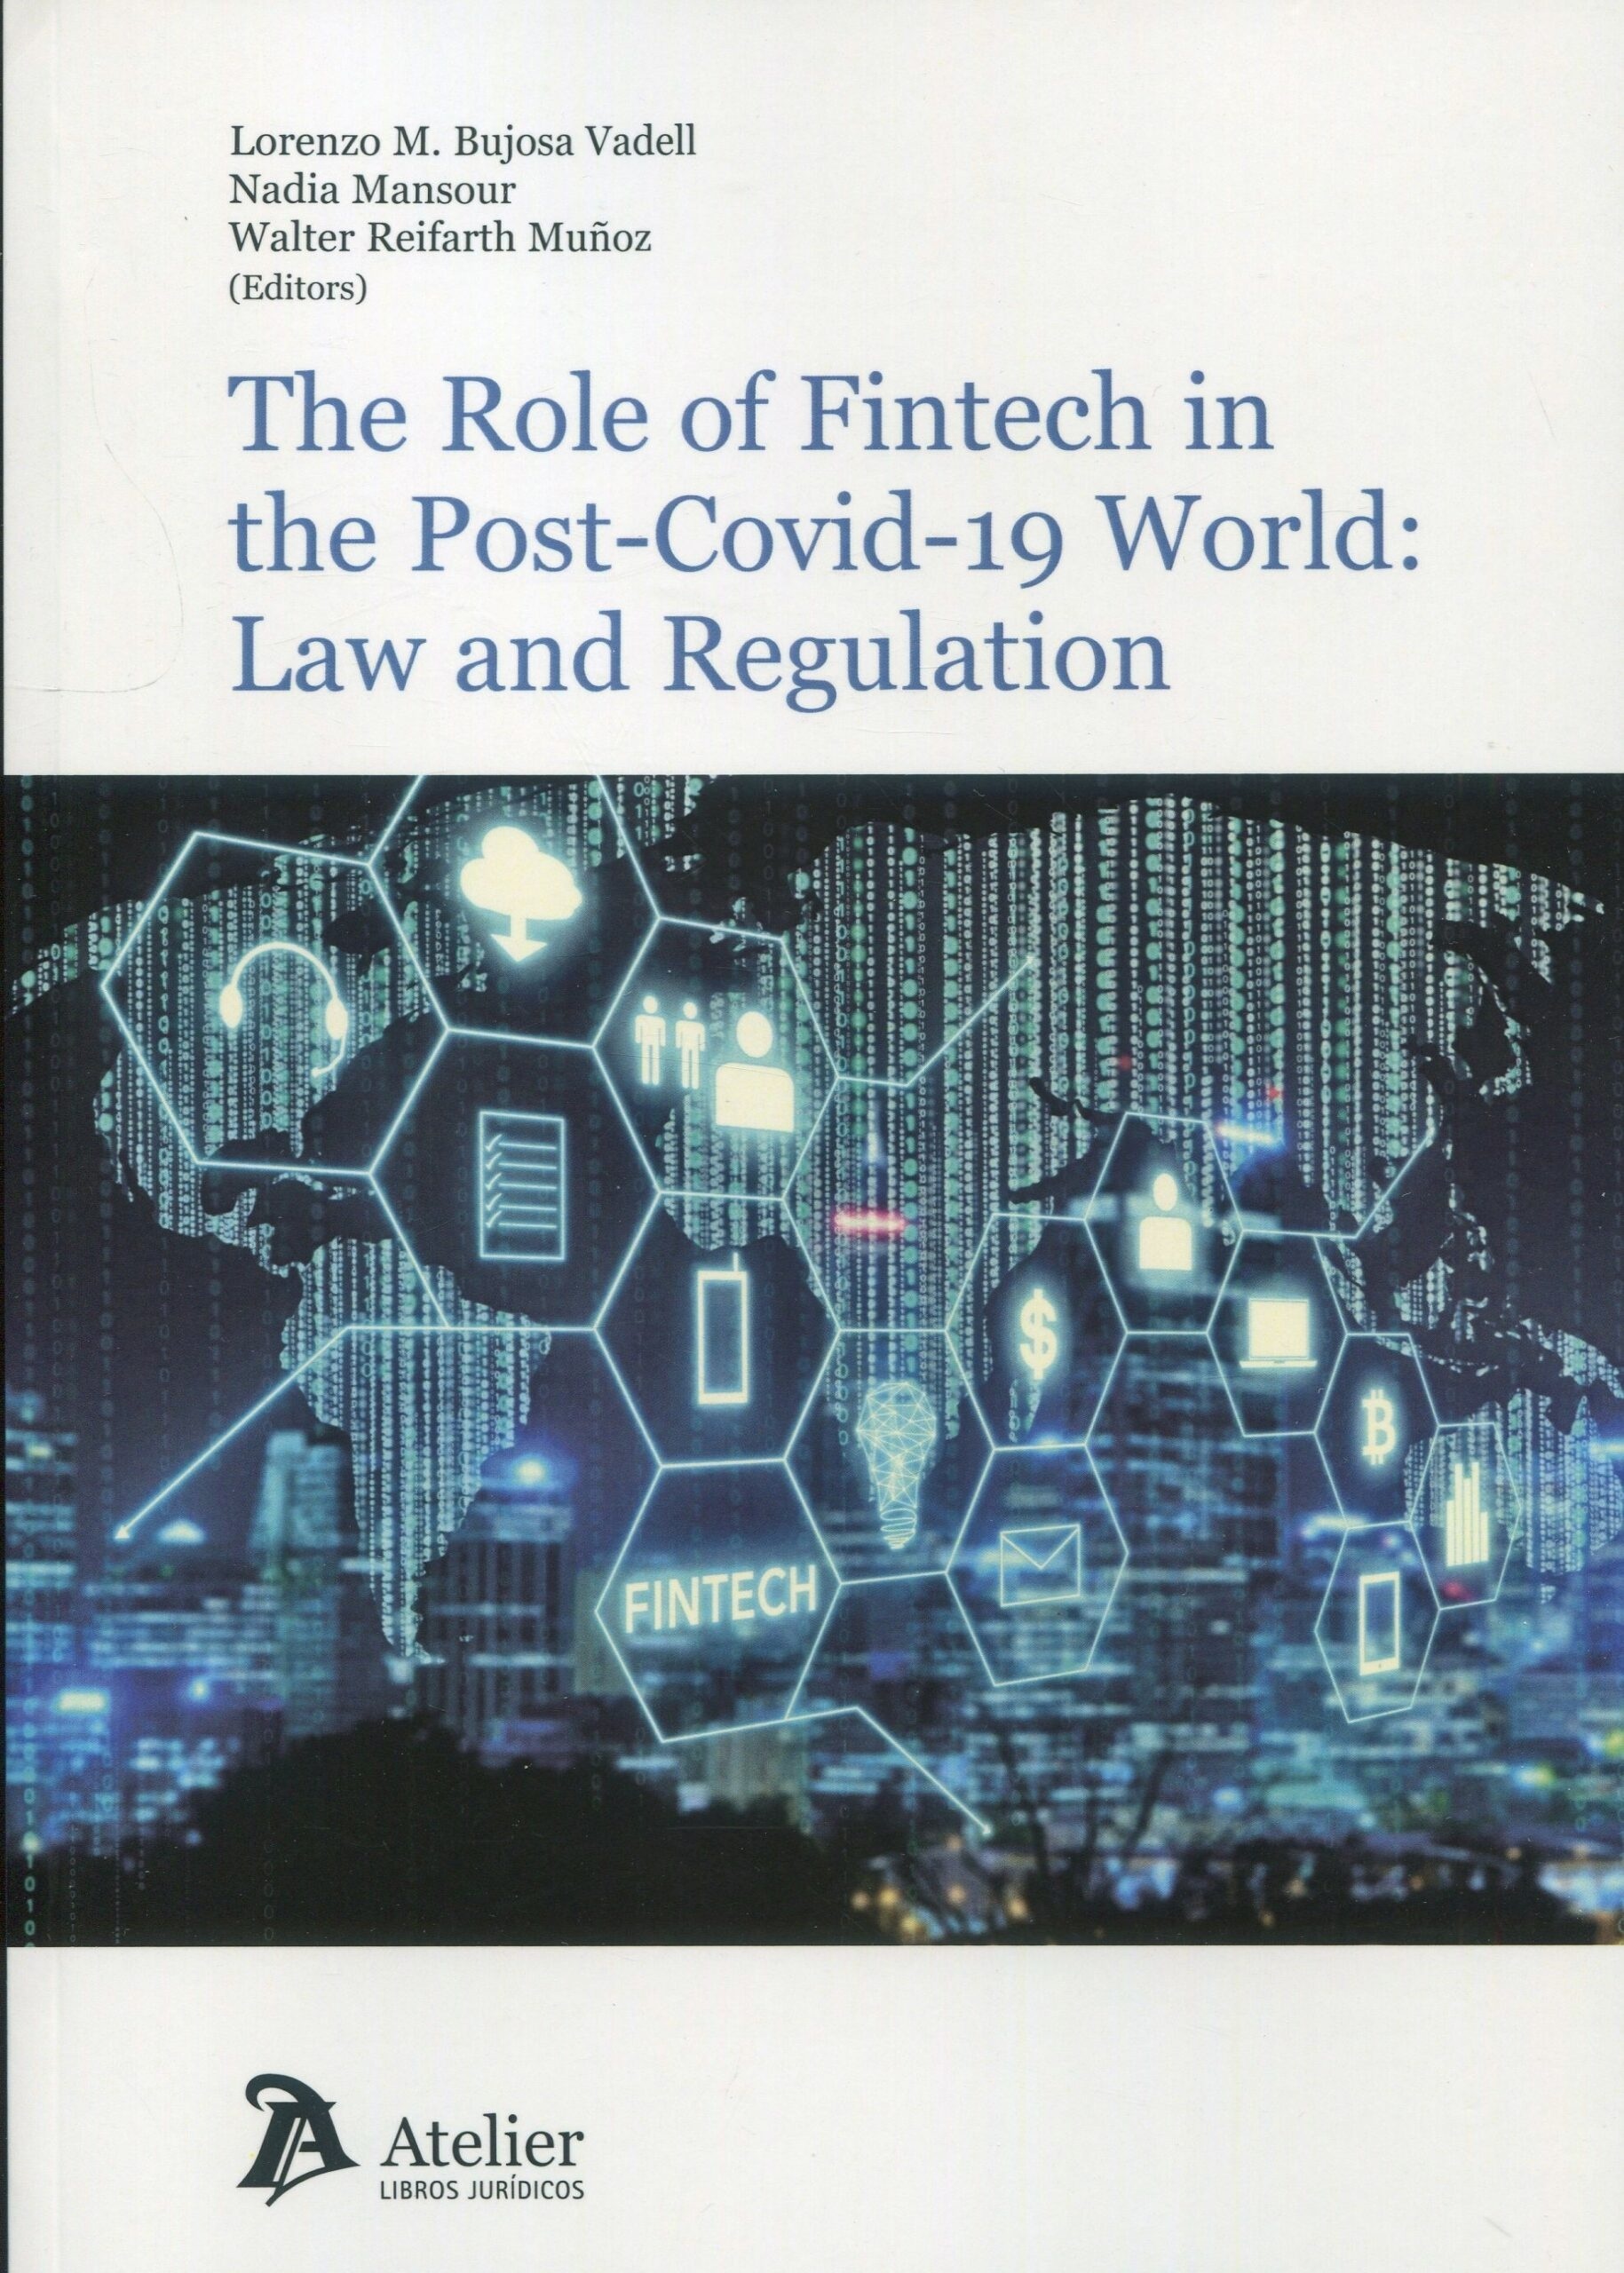 The role of fintech in the post-covid-19 world: Law and regulation